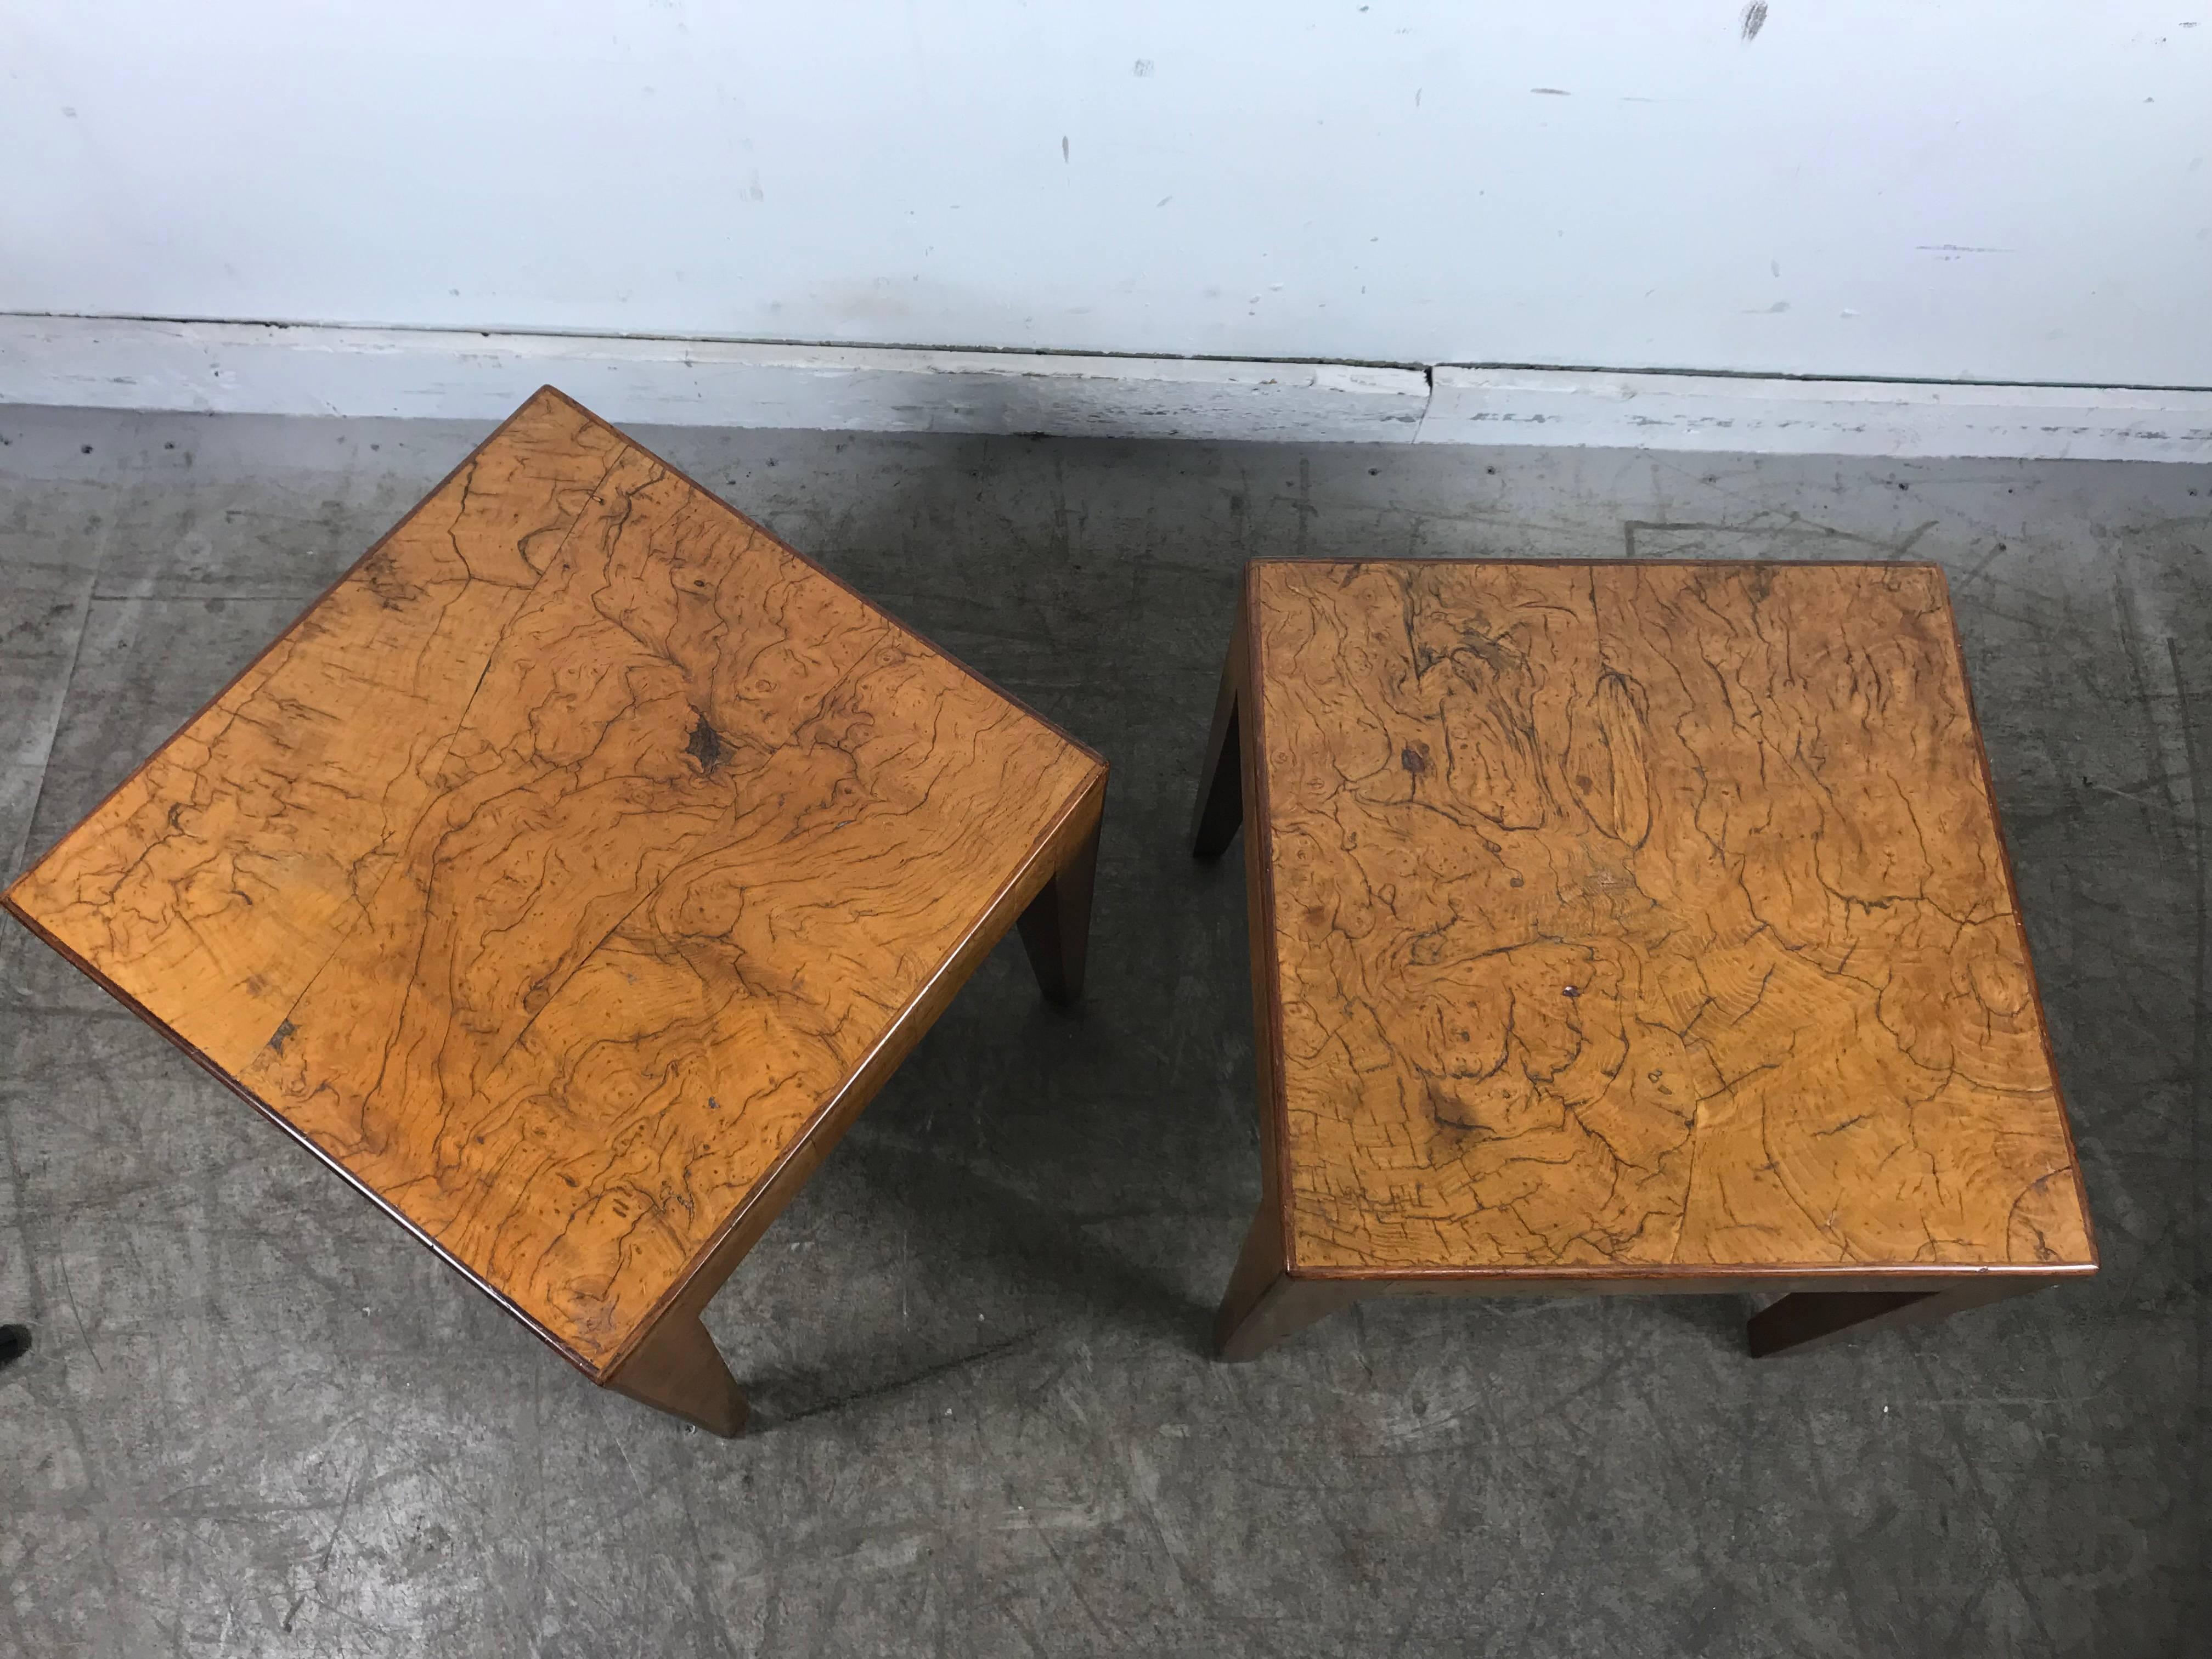 Pair of Elm Burl Wood Italian Modernist Tables 1940s after Willy Rizzo 3